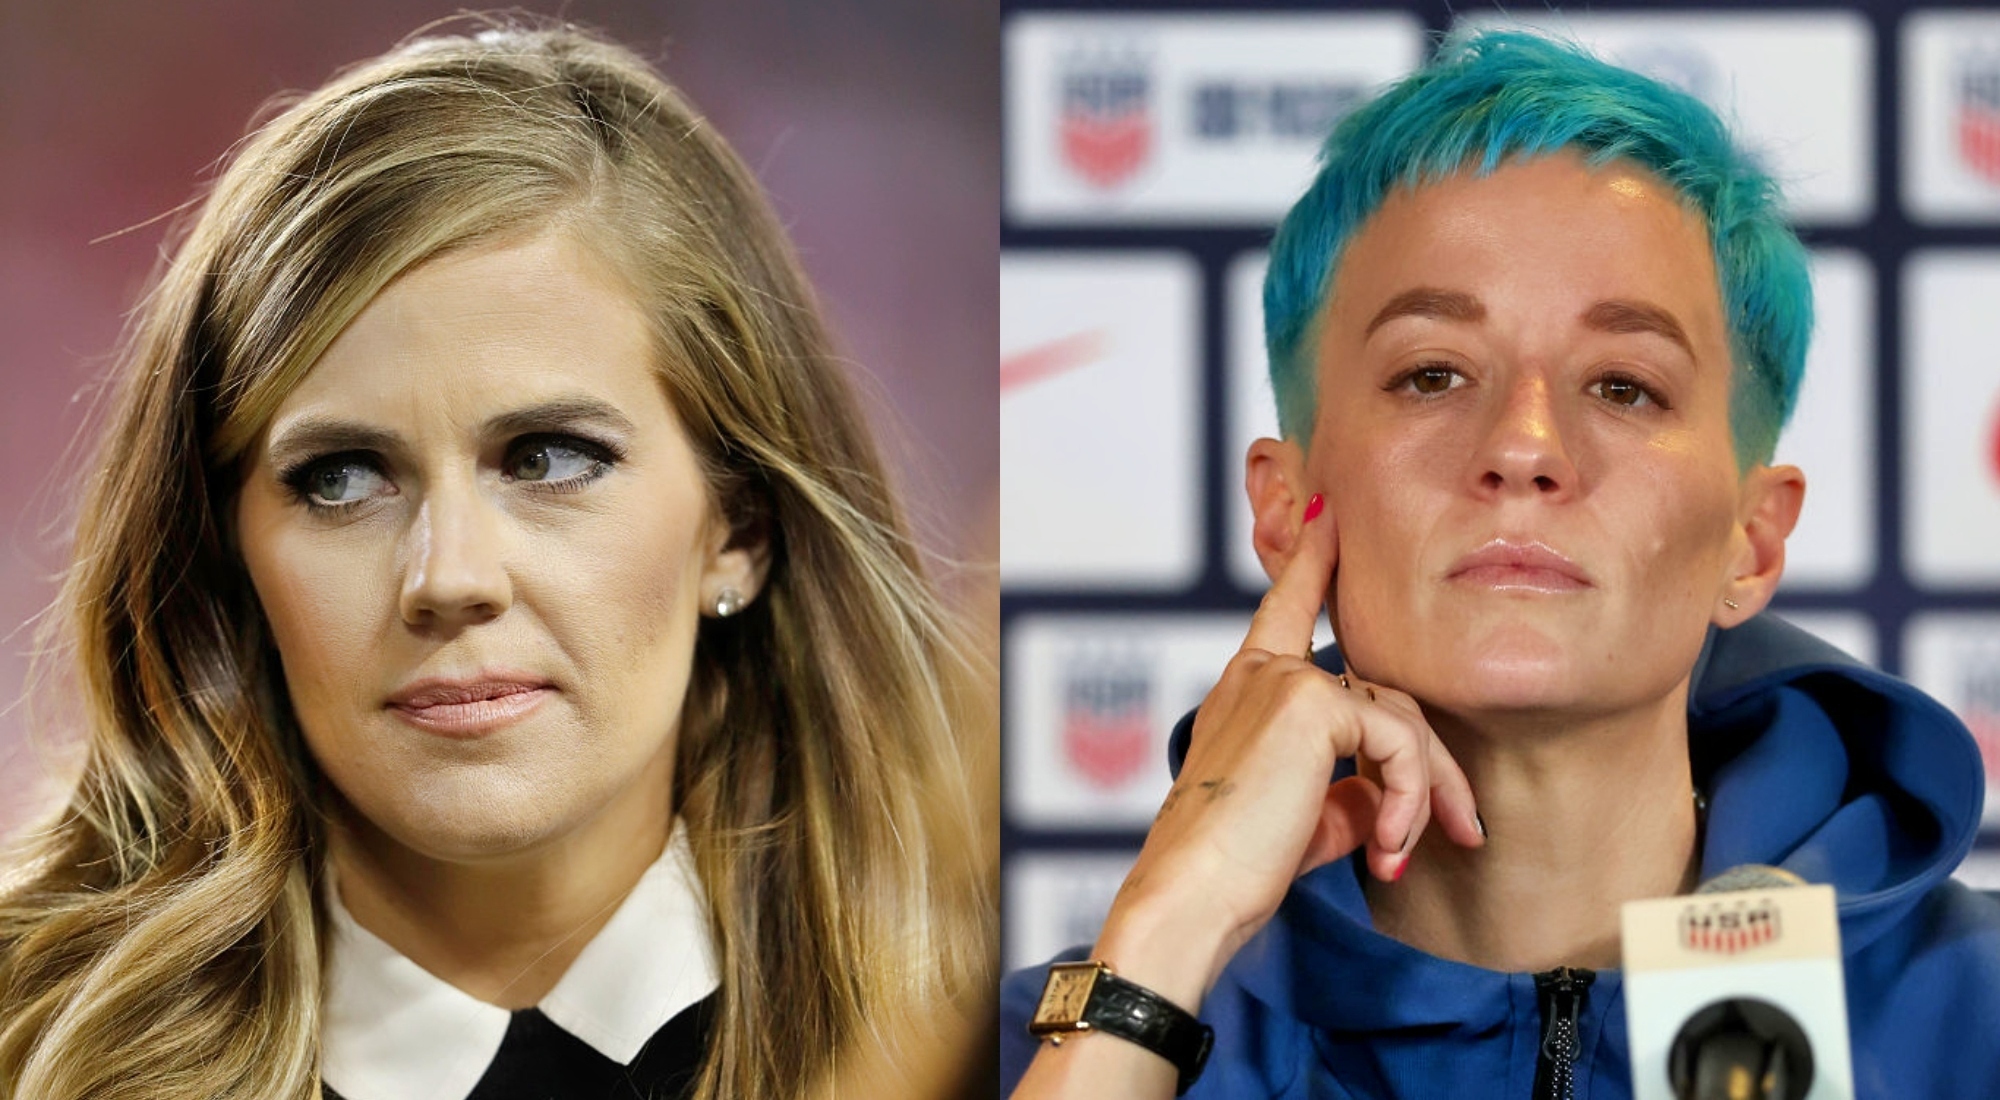 Sam Ponder Called Out Megan Rapinoe For 'Absurd' Comments